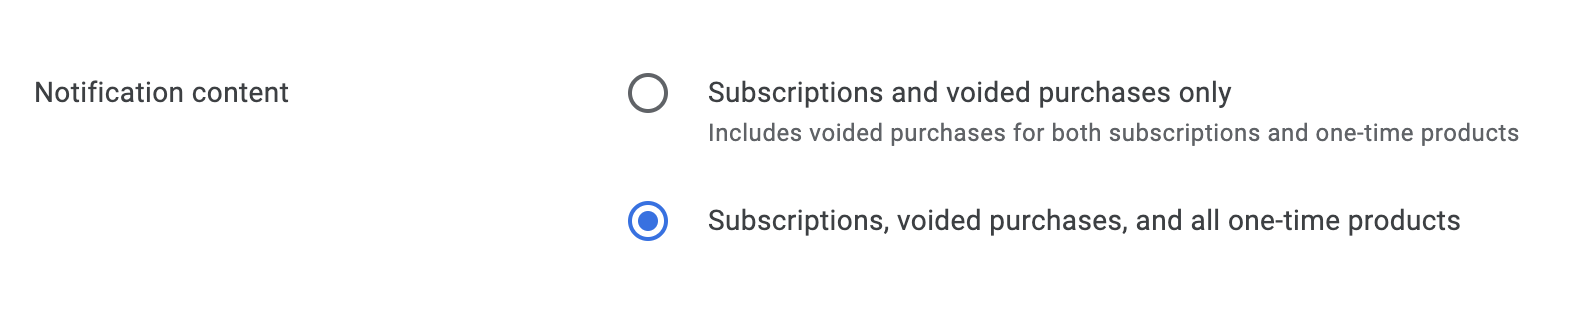 Google Play Console Notification Content